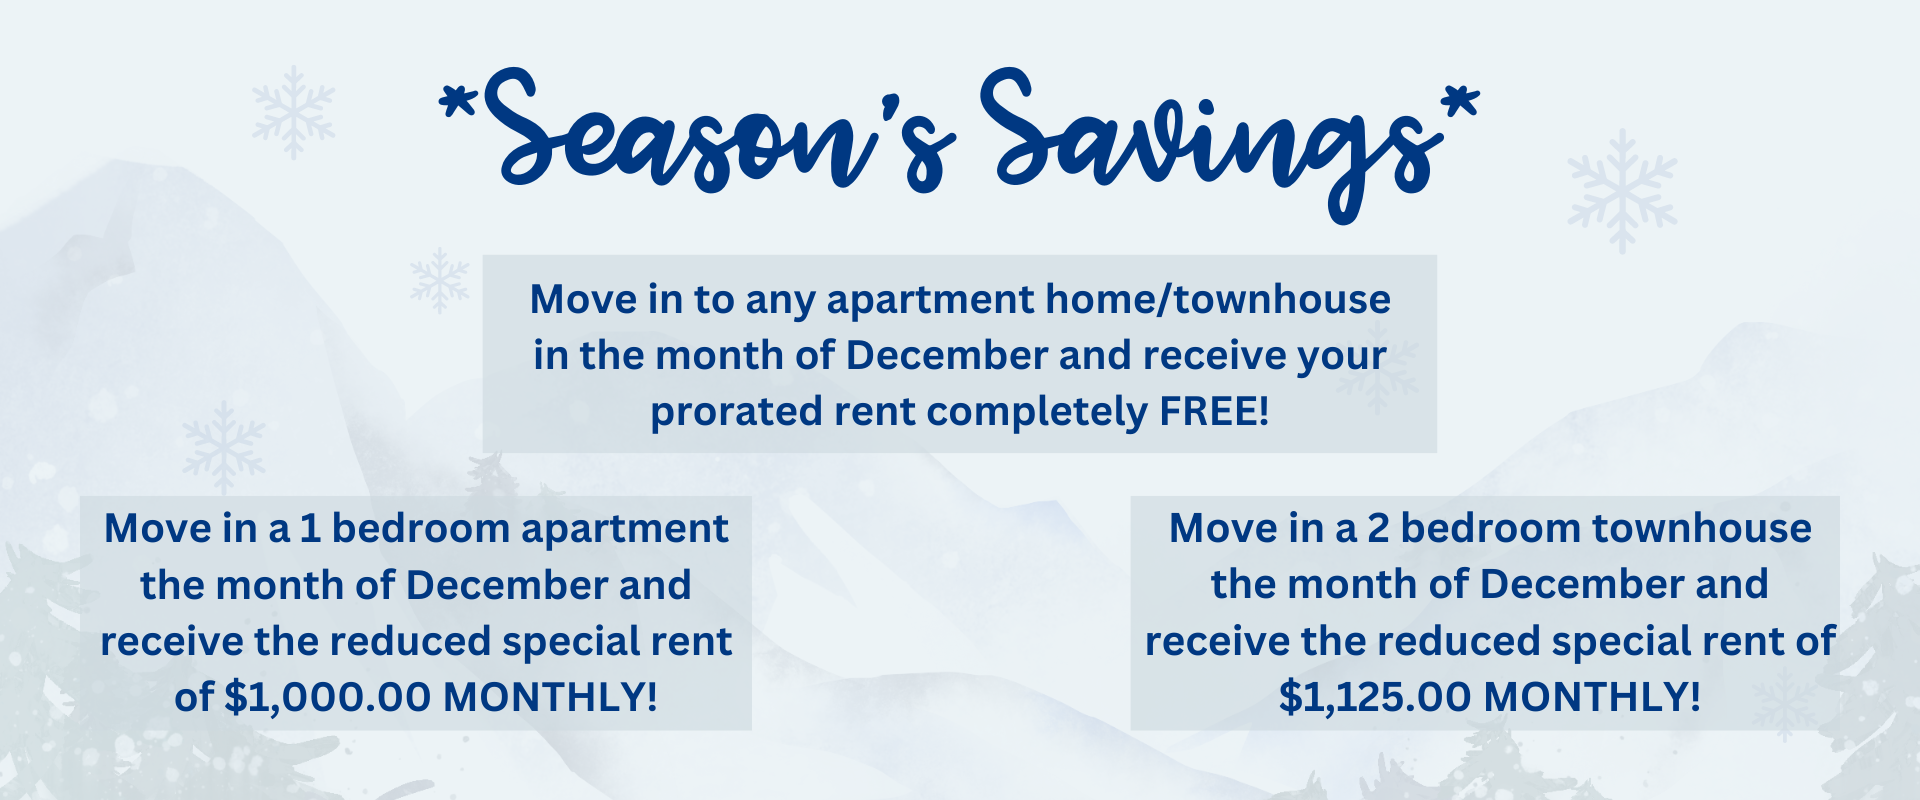 Move in to any apartment home/townhouse in the month of December and receive your prorated rent completely FREE! Move in a 1 bedroom apartment the month of December and receive the reduced special rent of $1,000.00 MONTHLY!